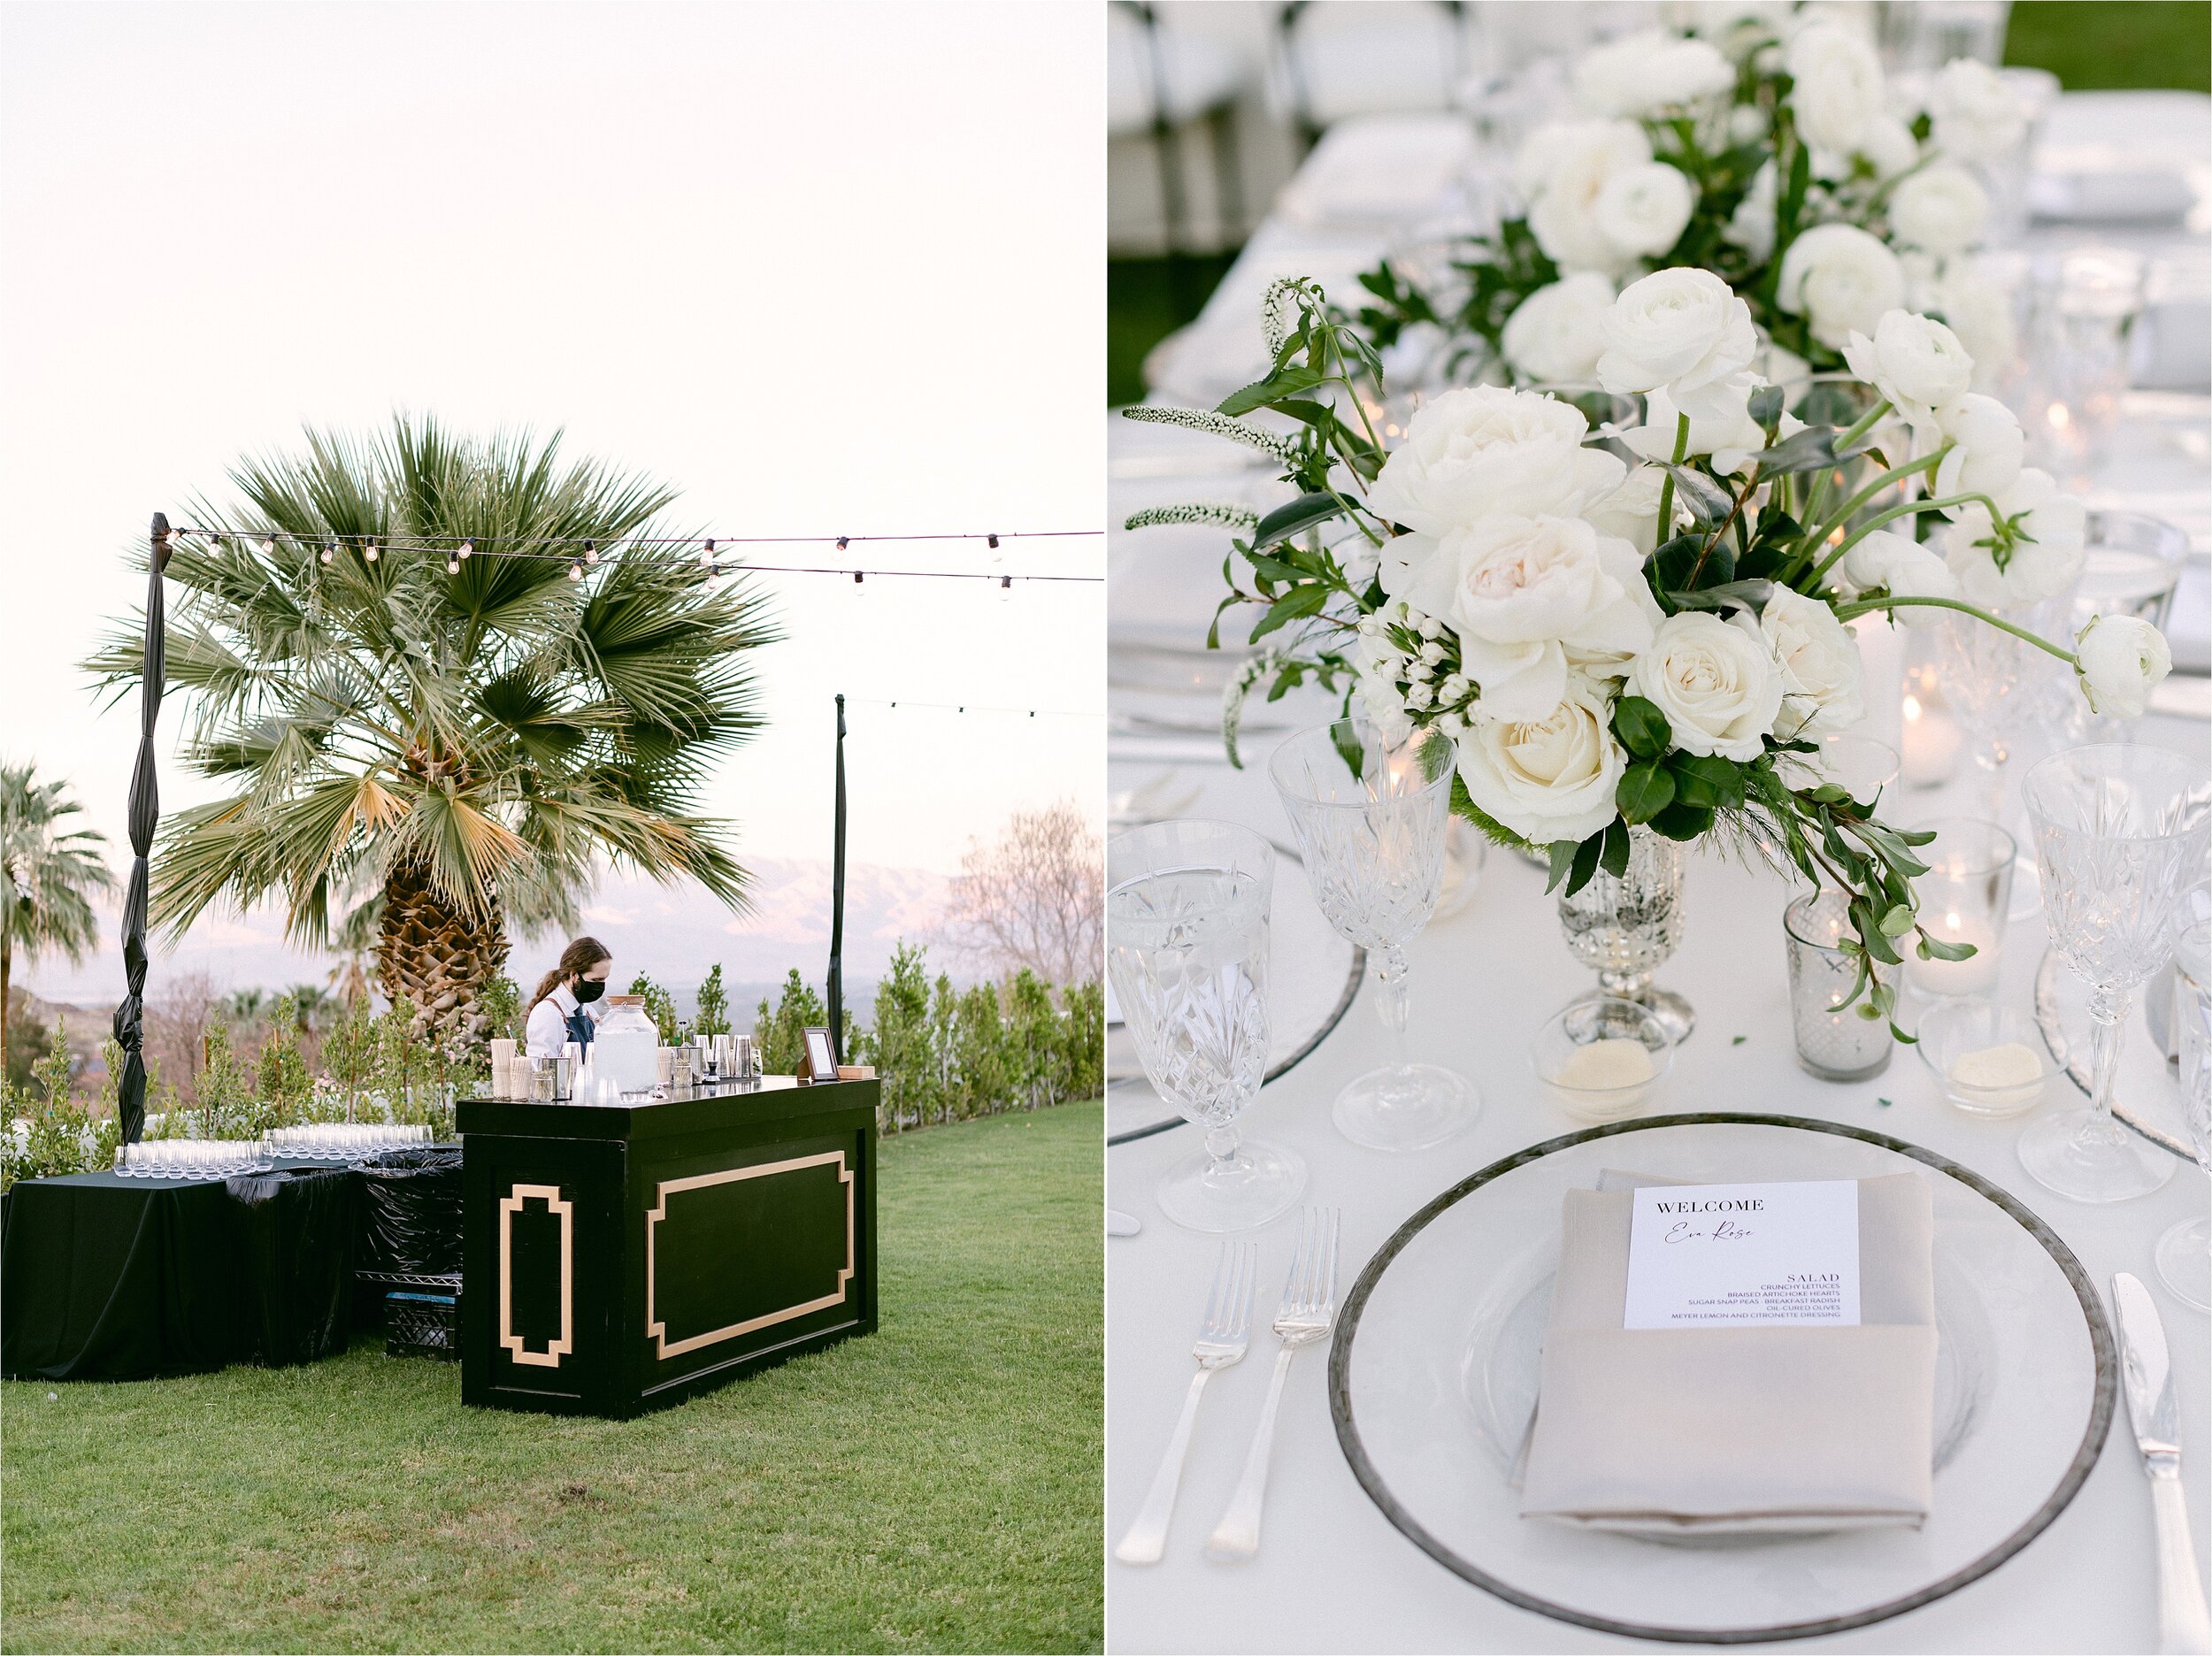 Outdoor wedding reception at a private estate in Palm Springs, CA.  Featuring white floral centerpieces, crystal glassware and white china.